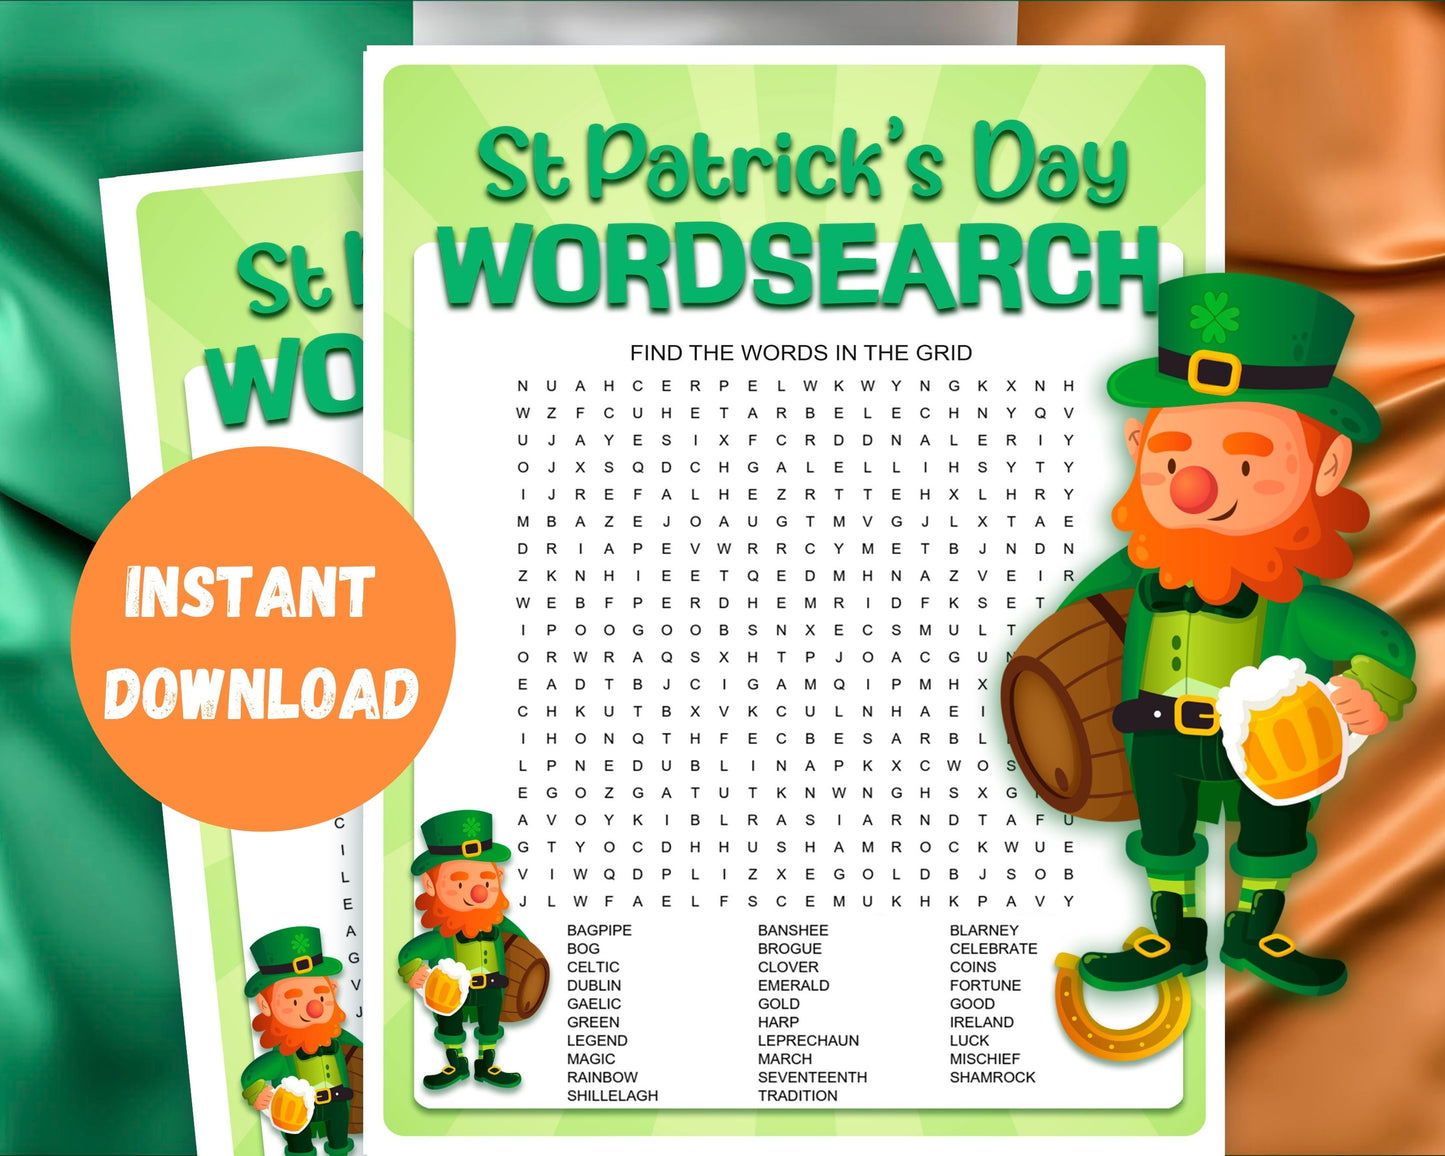 St Patrick's Day Word Search Activity